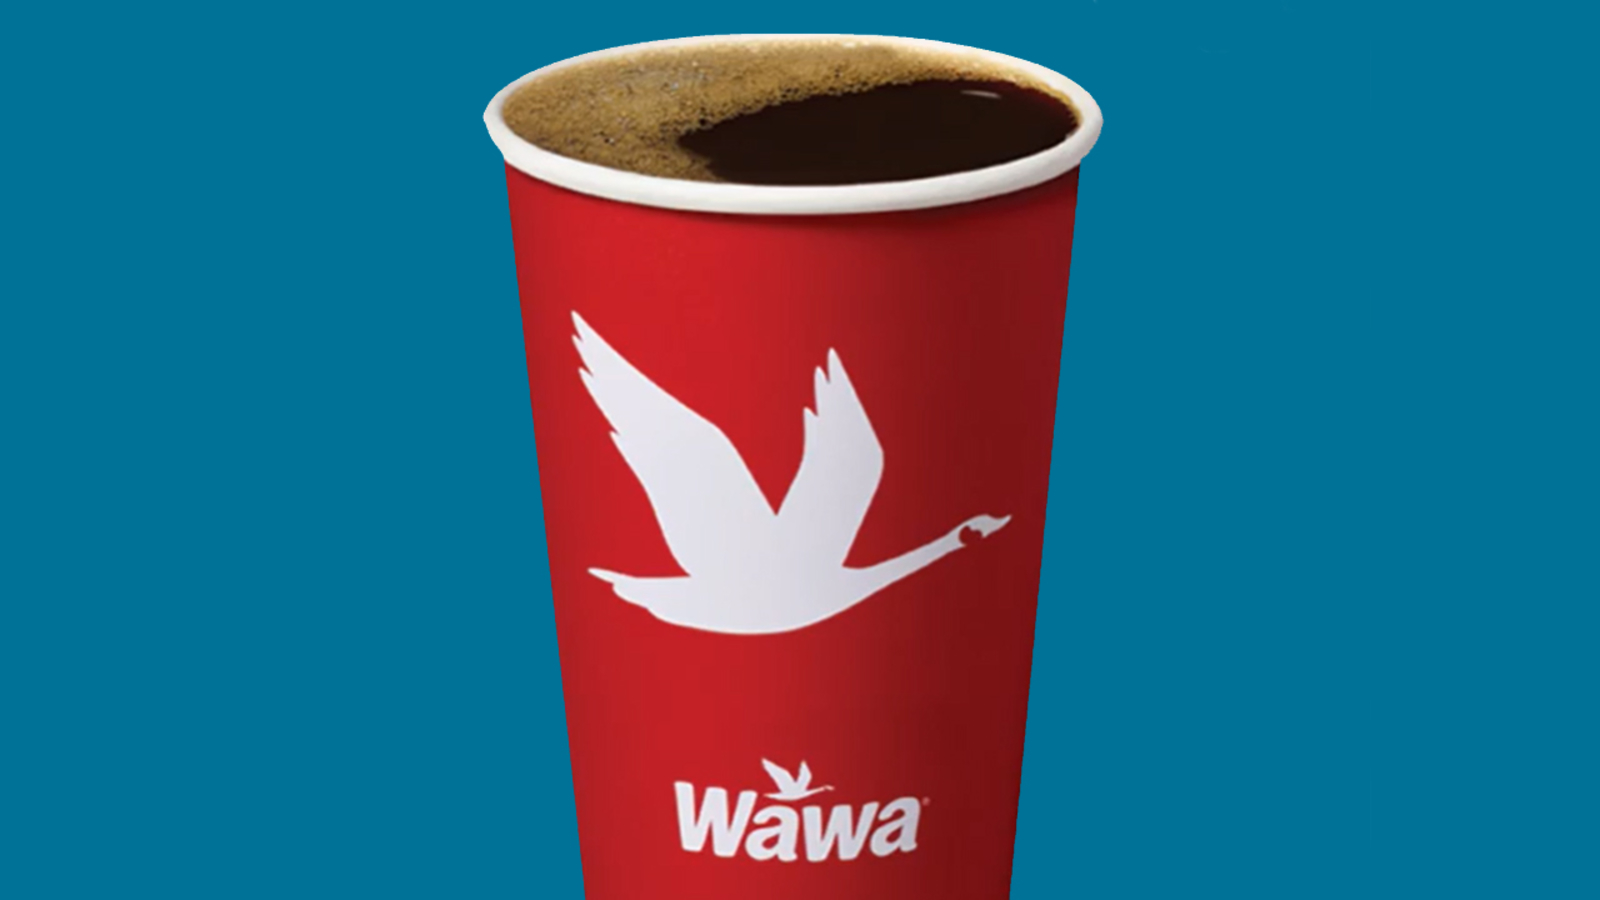 Wawa offering free coffee of any size on its 60th anniversary MisrSat